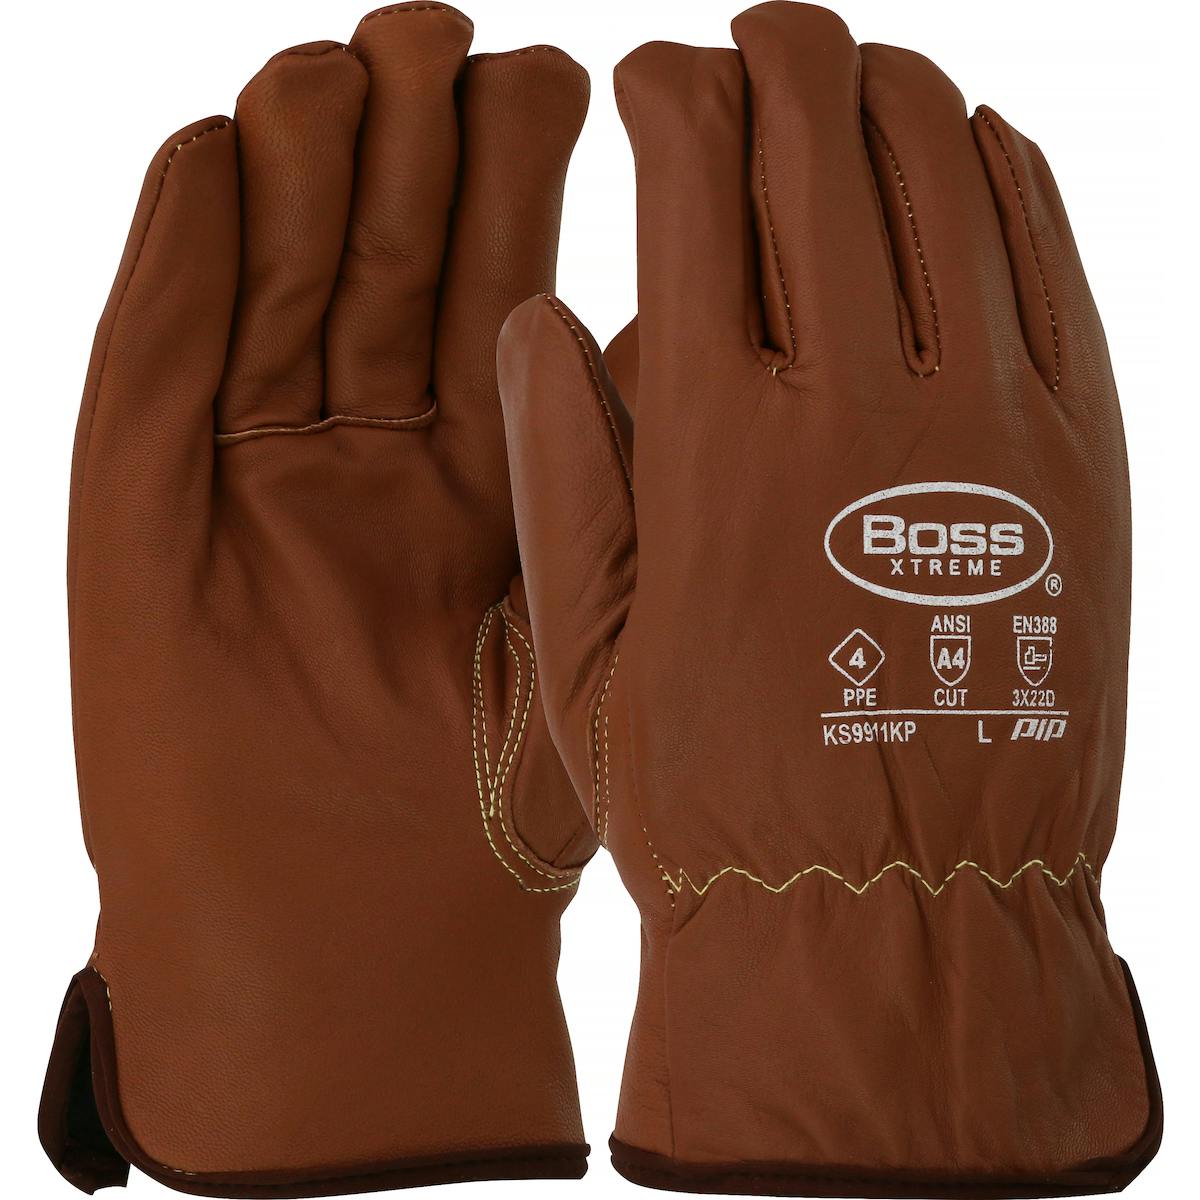 Boss® Xtreme AR Top Grain Goatskin Leather Drivers Glove with Oil Armor™ Finish and Para-Aramid Lining - Fleece Lined Insulation (KS9911KP)